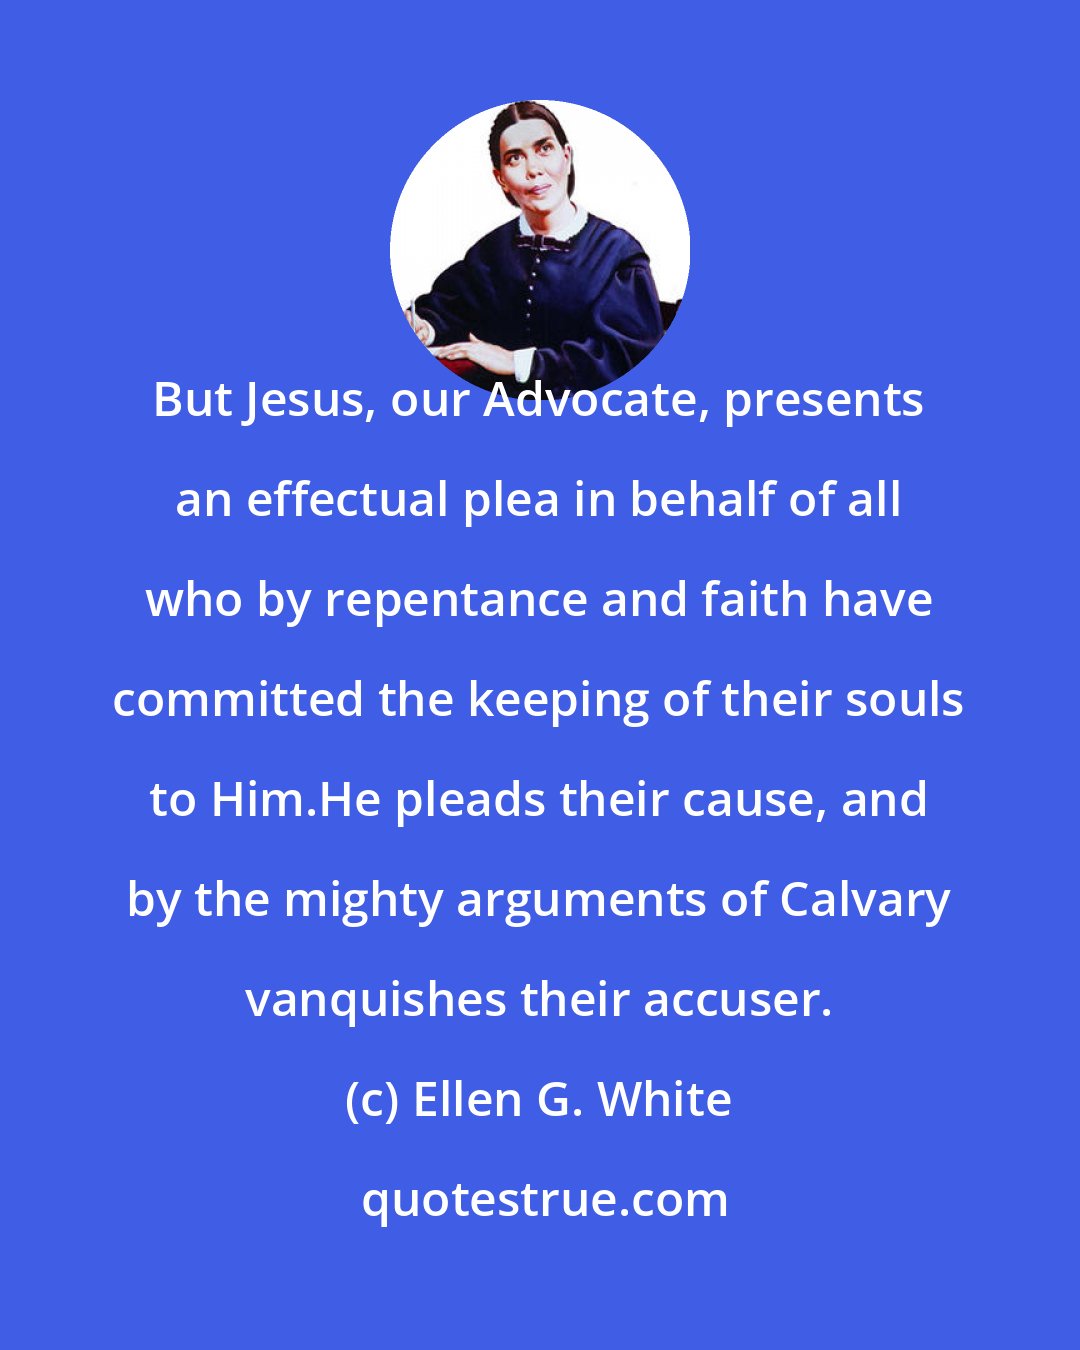 Ellen G. White: But Jesus, our Advocate, presents an effectual plea in behalf of all who by repentance and faith have committed the keeping of their souls to Him.He pleads their cause, and by the mighty arguments of Calvary vanquishes their accuser.